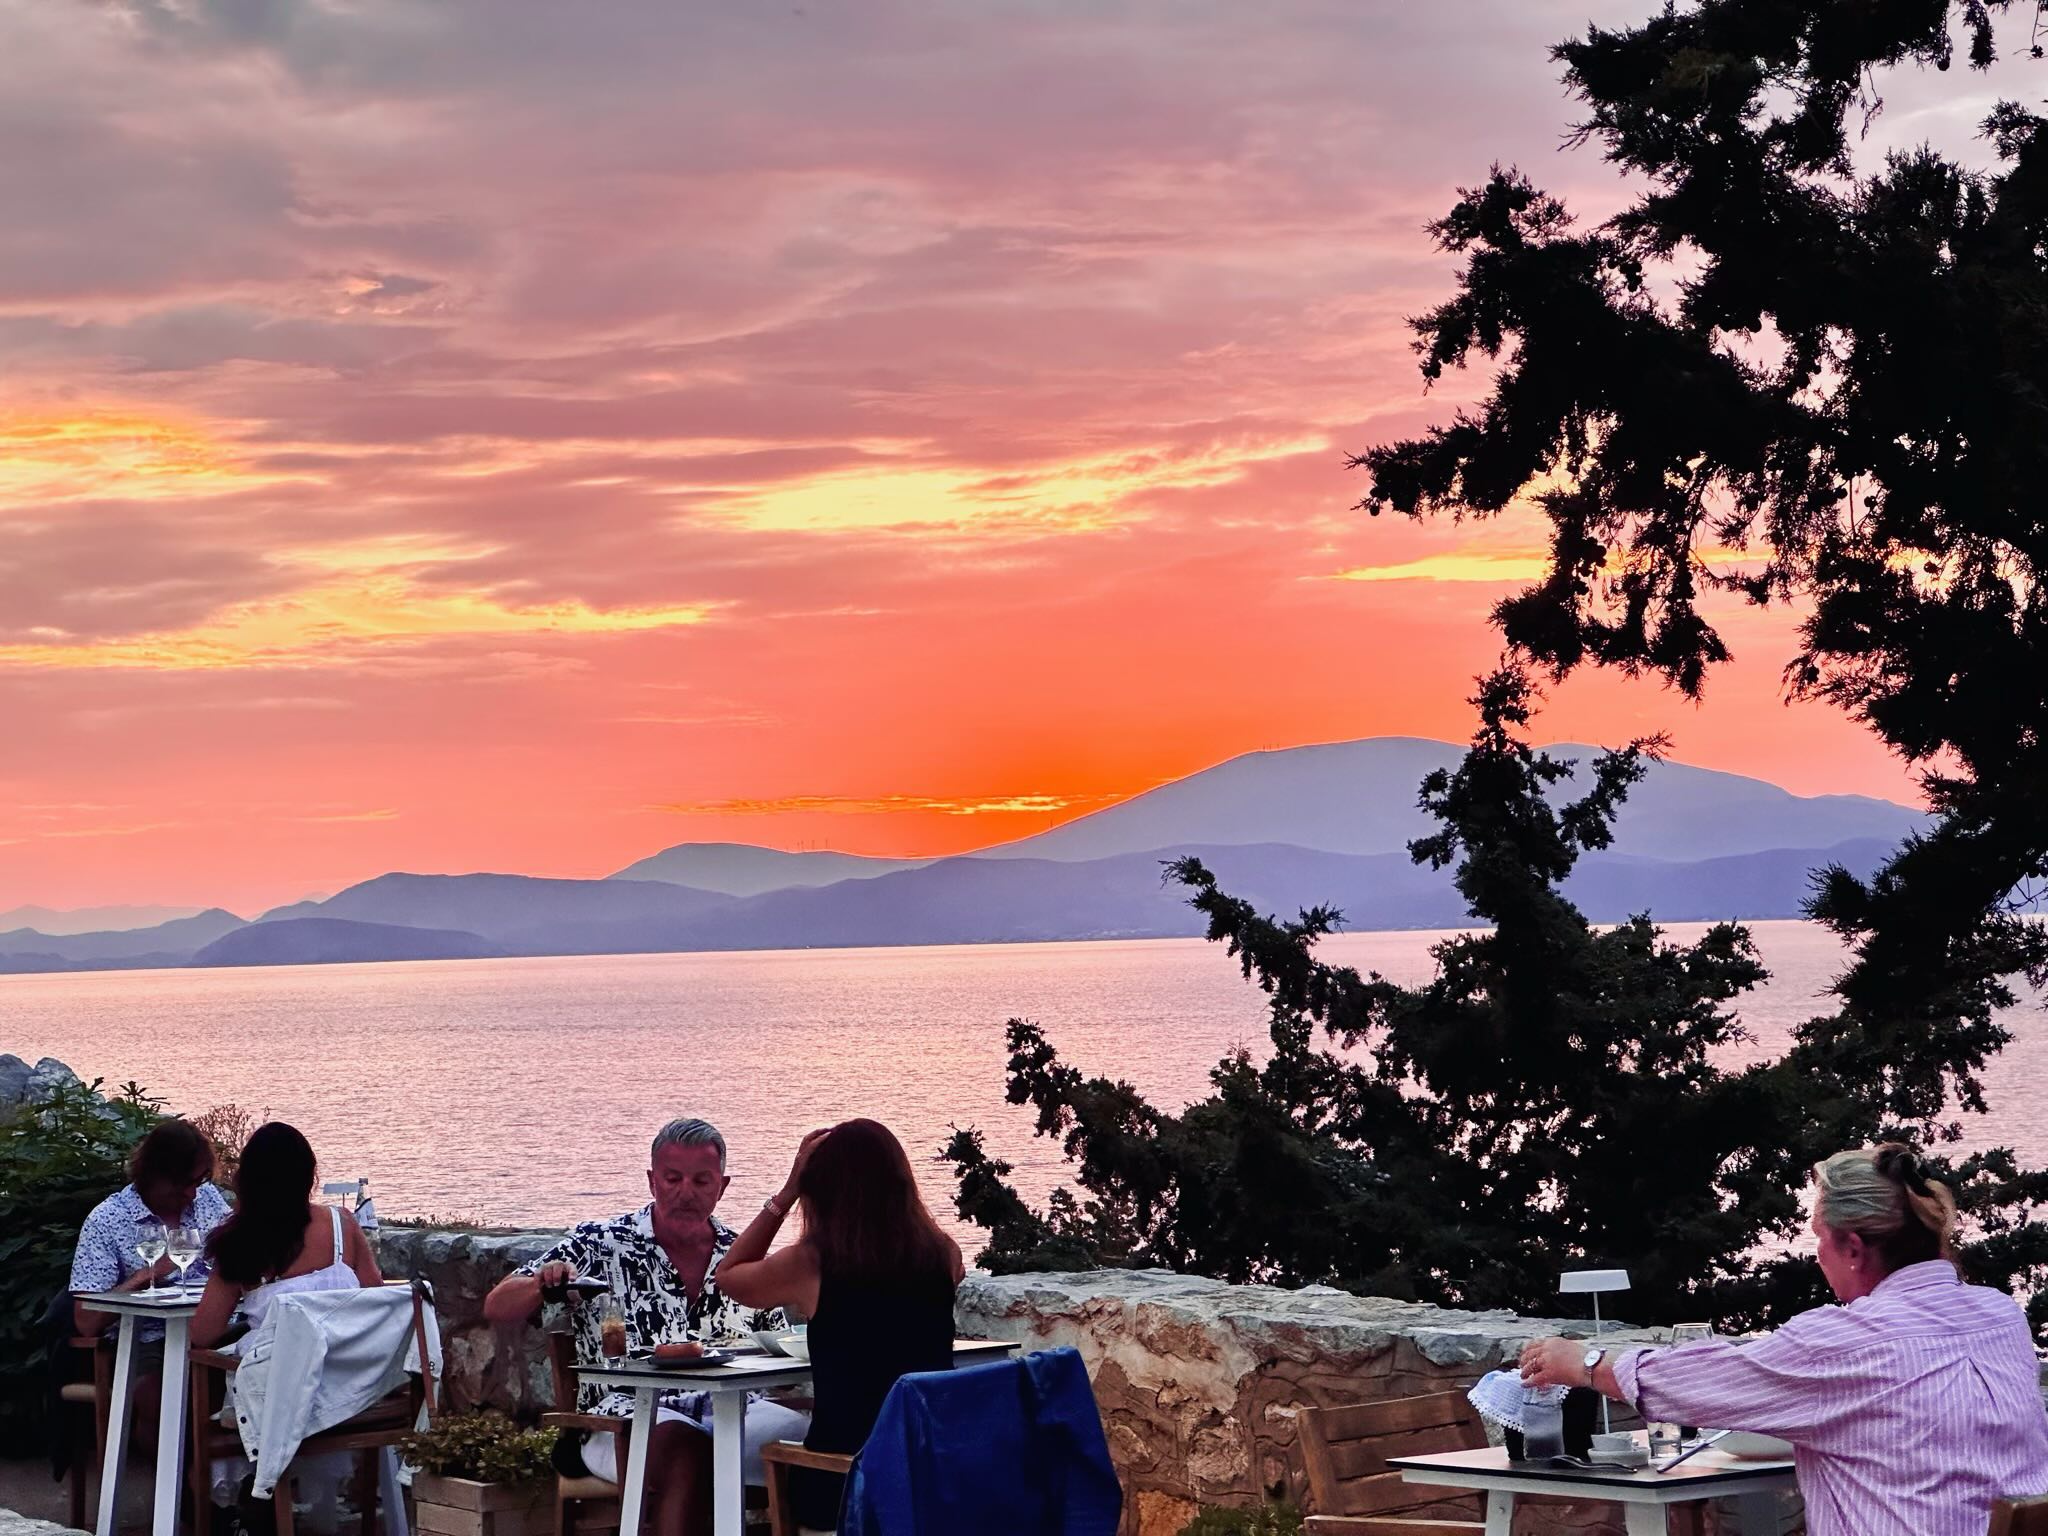 The view of a sunset by Techne Restaurant on Hydra Island.